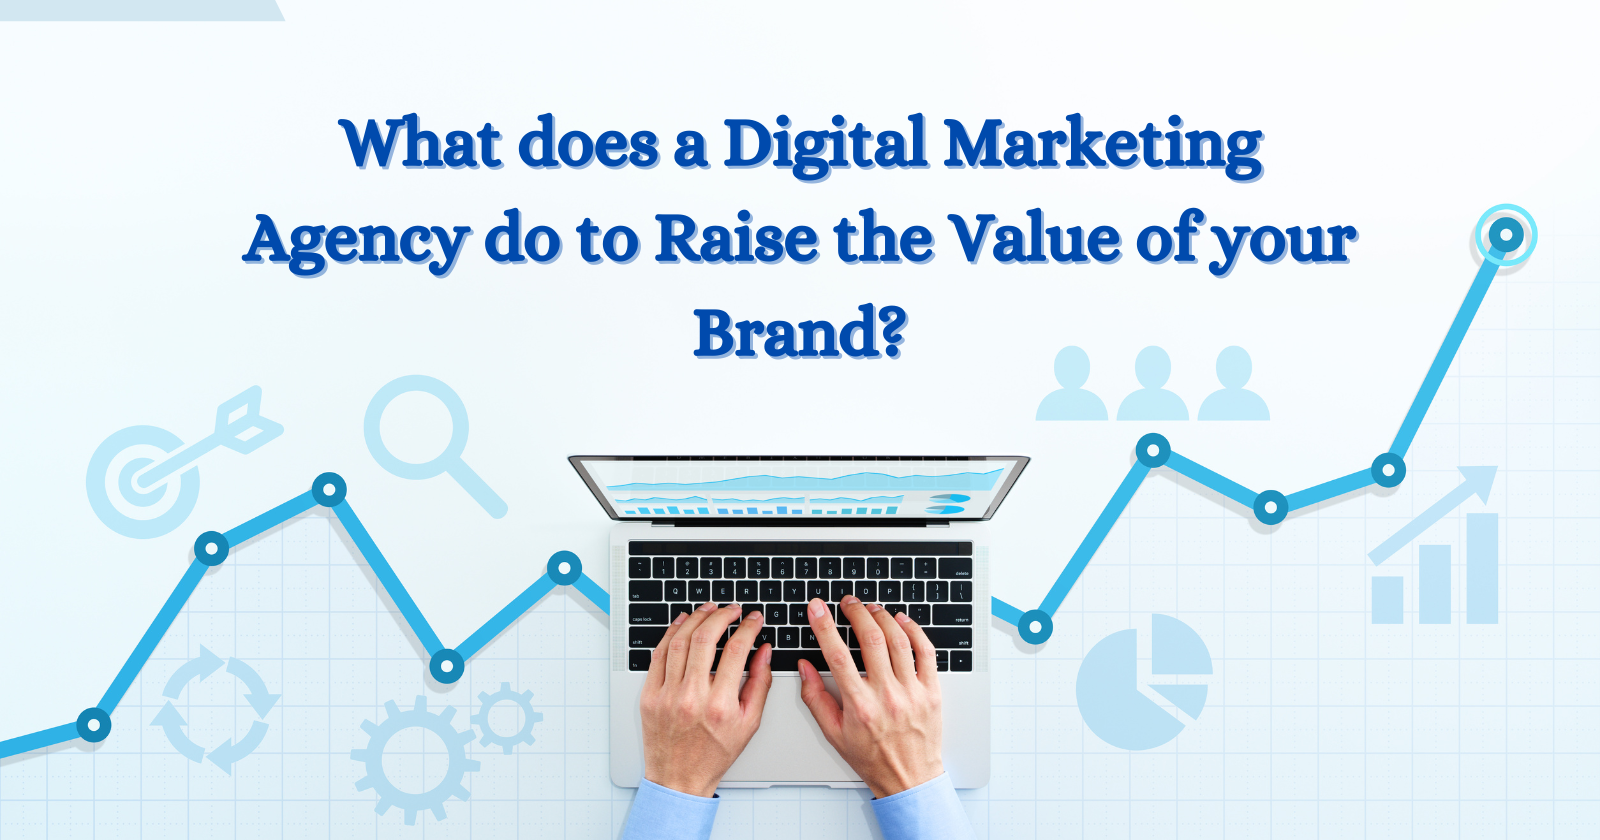 What does a Digital Marketing Agency do to Raise the Value of Your Brand?